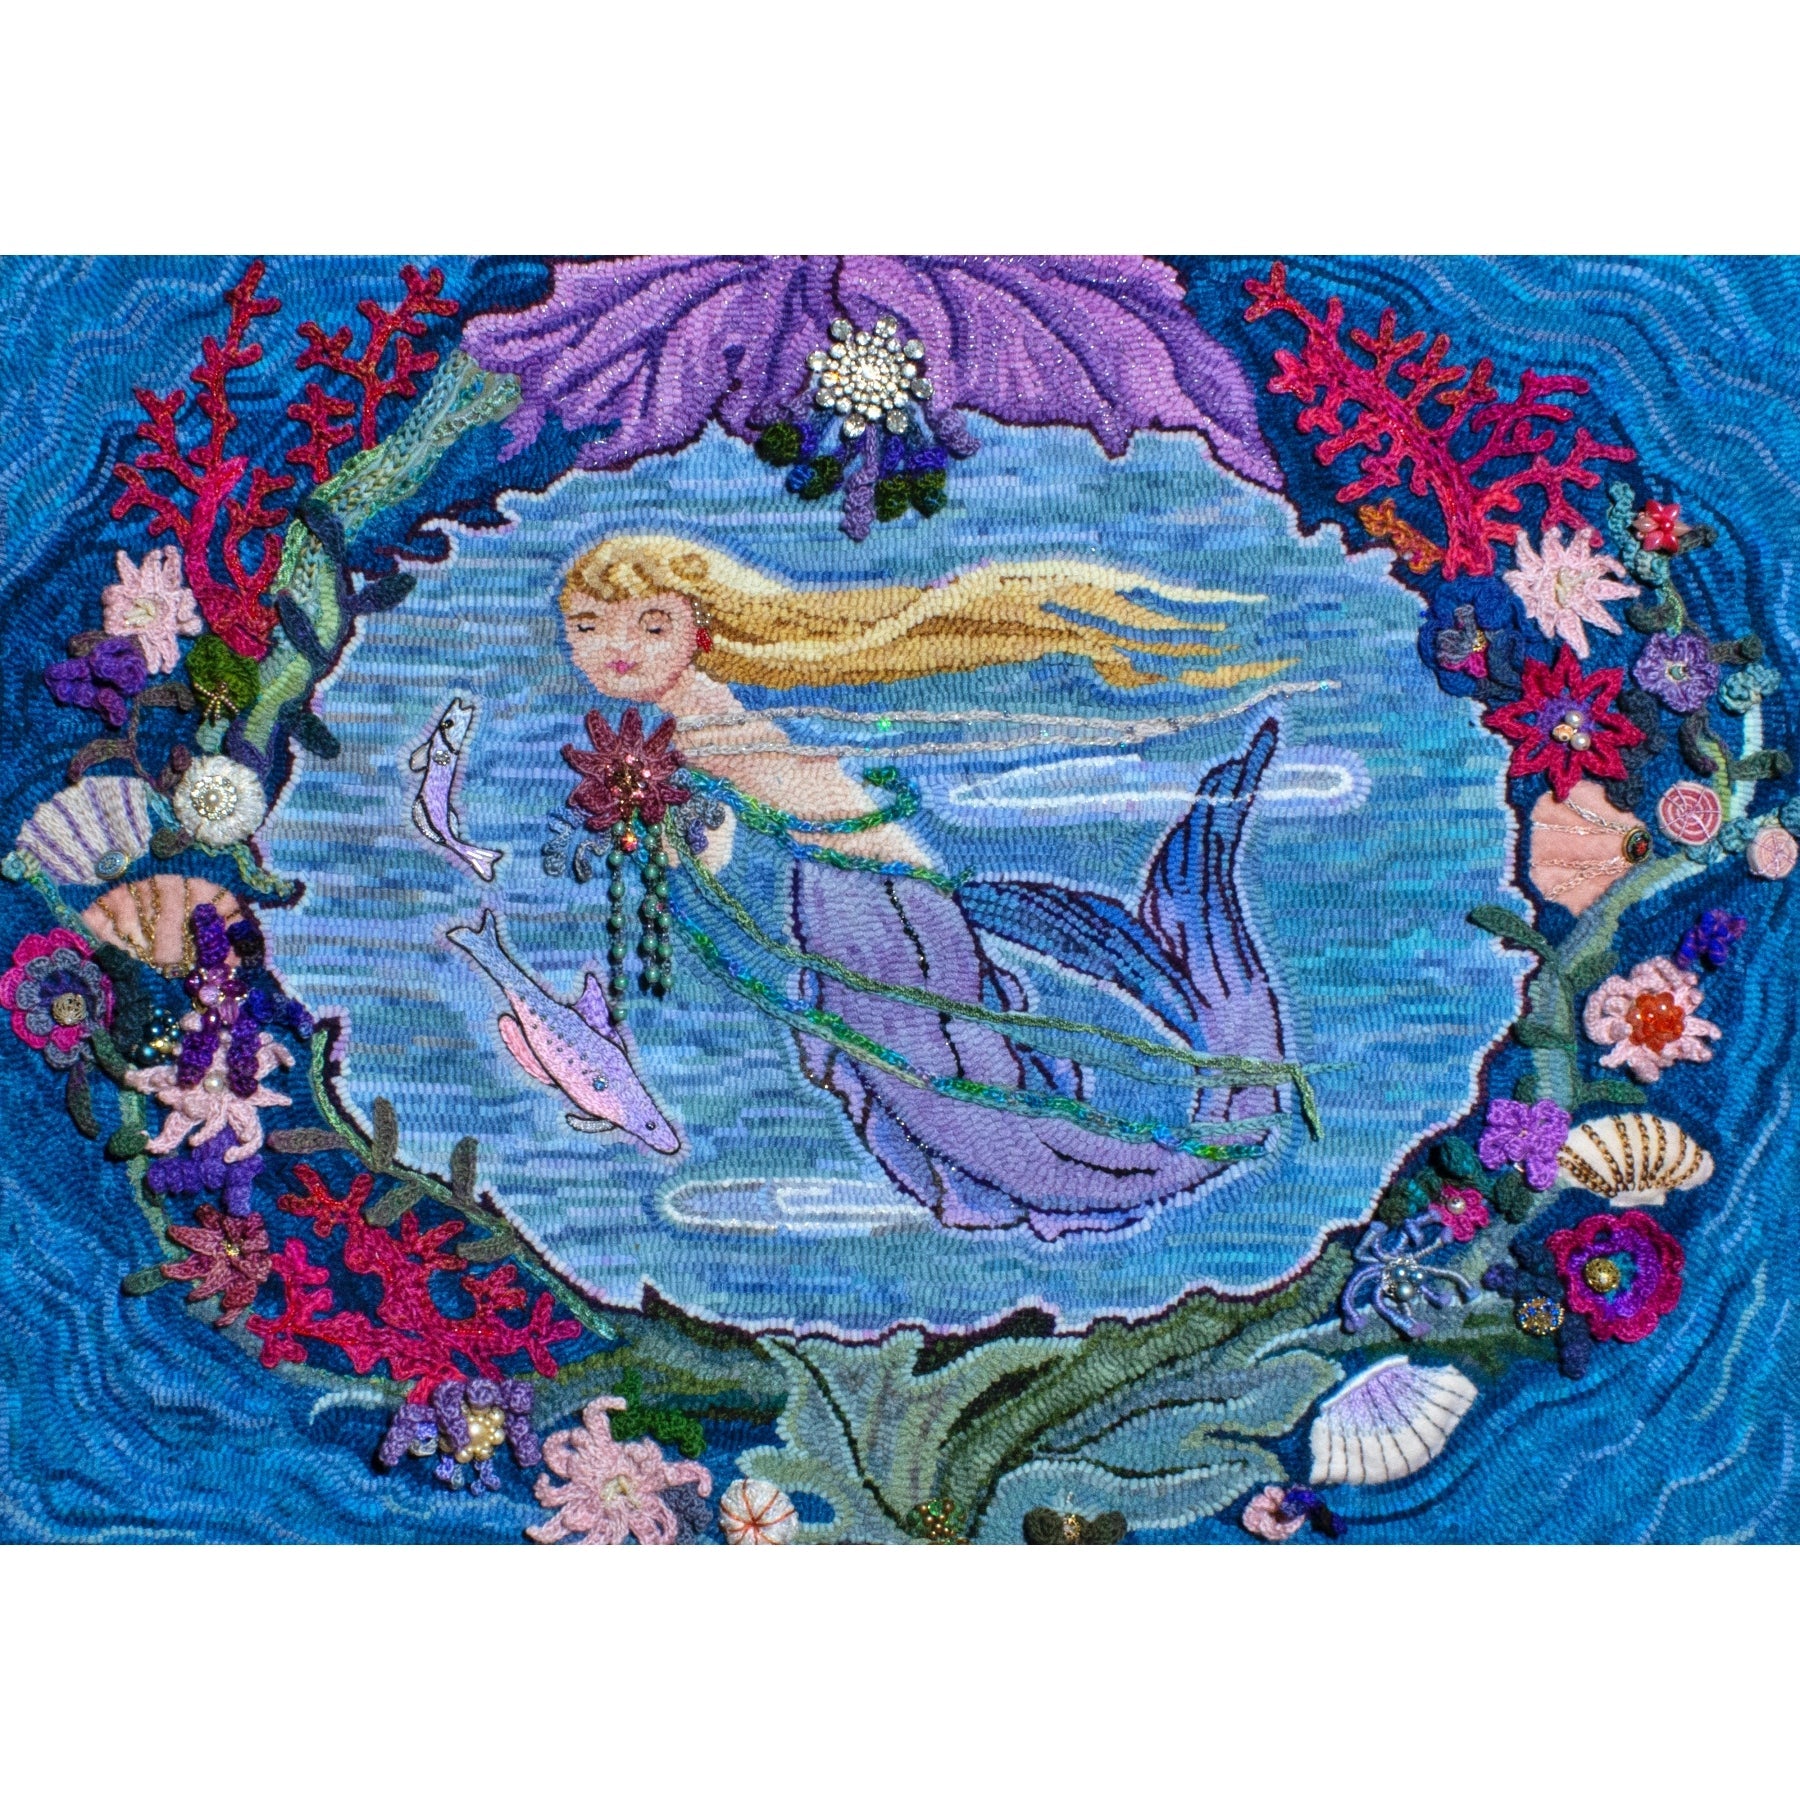 The Little Mermaid Book Cover ill. Rie Cramer, rug hooked by Gina Paschal